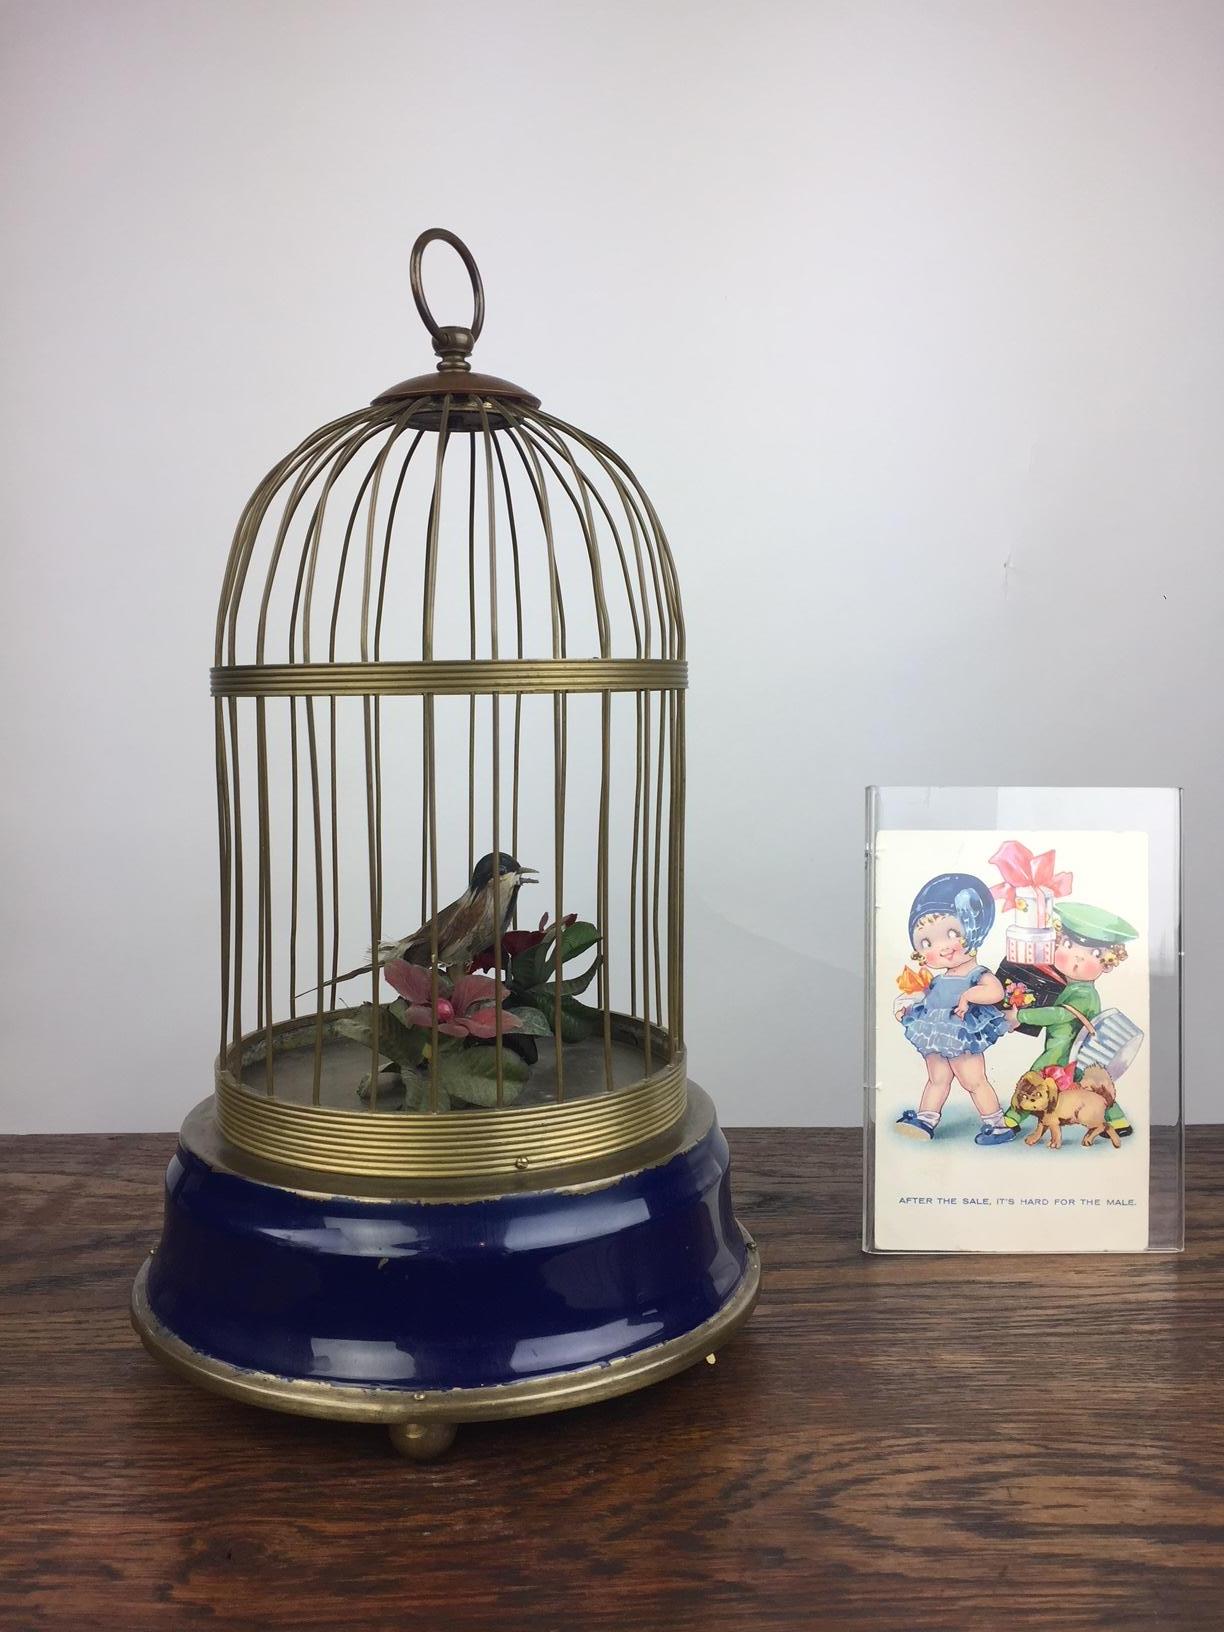 Birdcage, bird cage with a singing bird inside.
This automaton has 1 singing bird in the cage which is sitting on flowers.
As well the bird as the flowers are very fine detailed and they look very realistic.
While the bird is singing, he opens